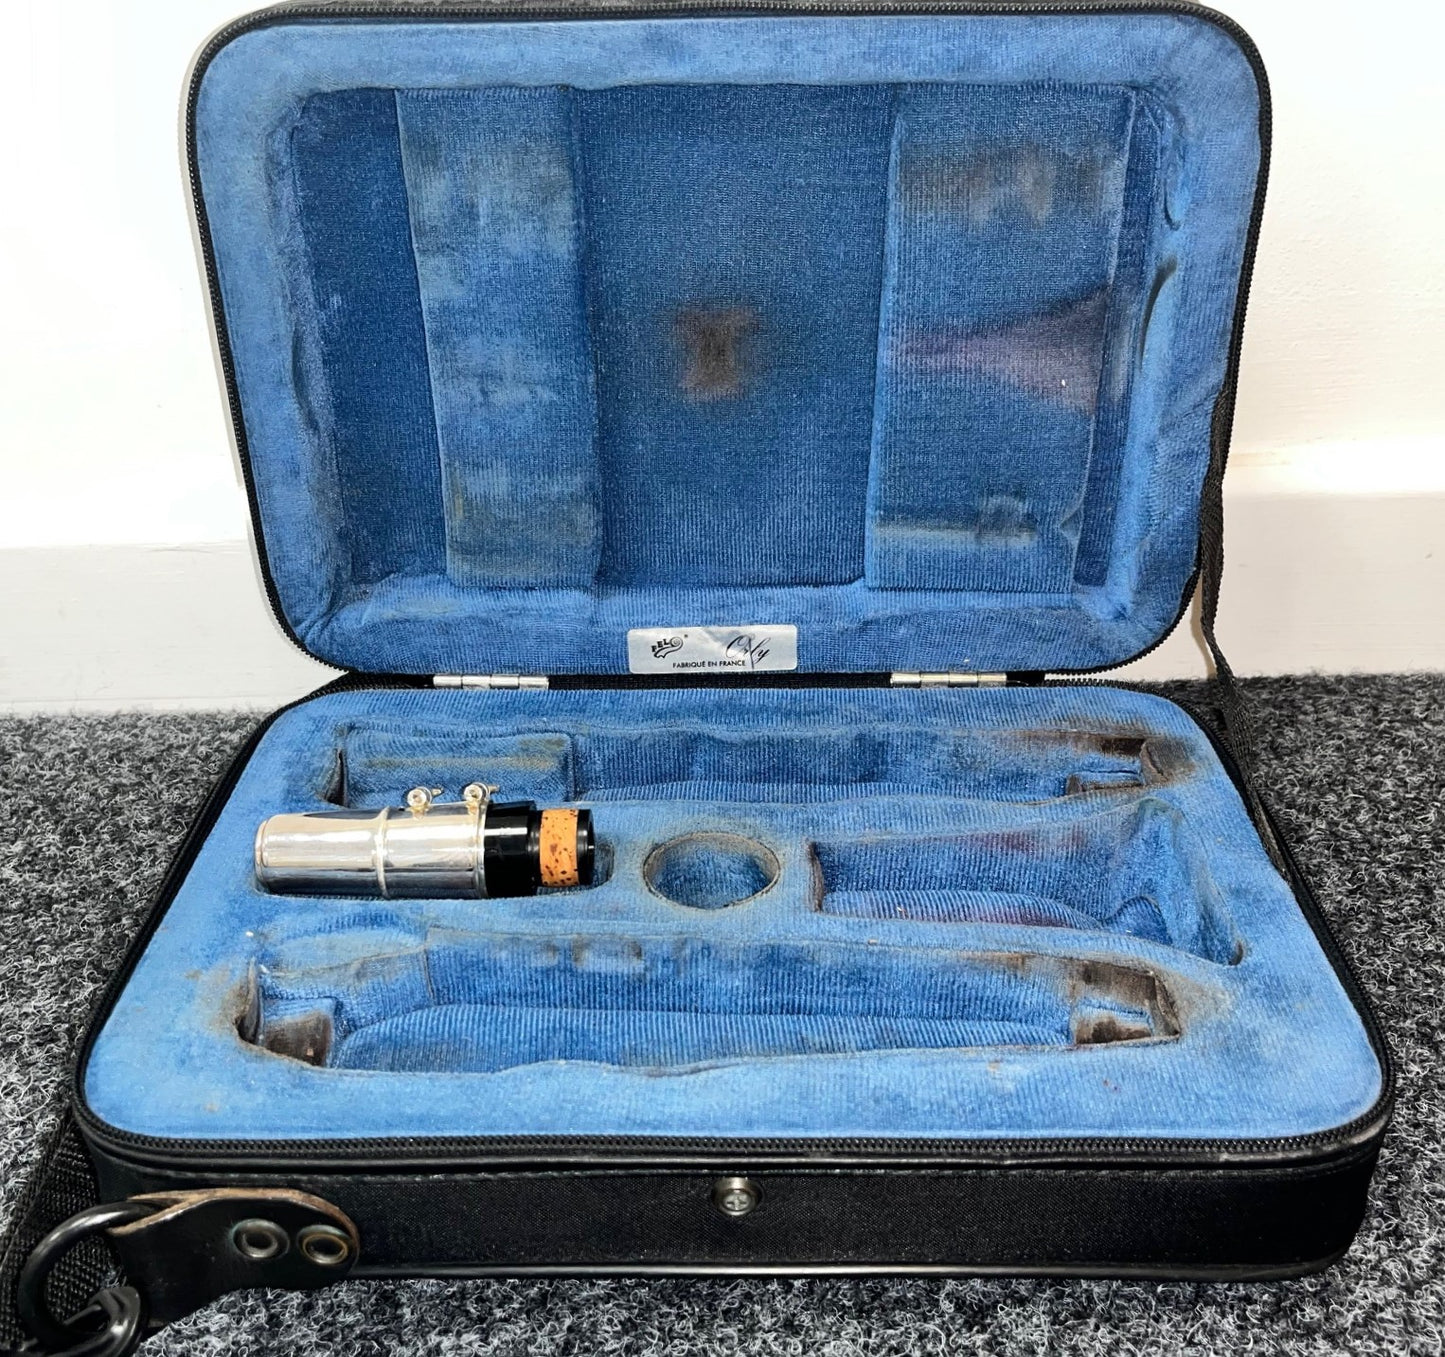 Buffet R13 Bb Clarinet (pre-owned)